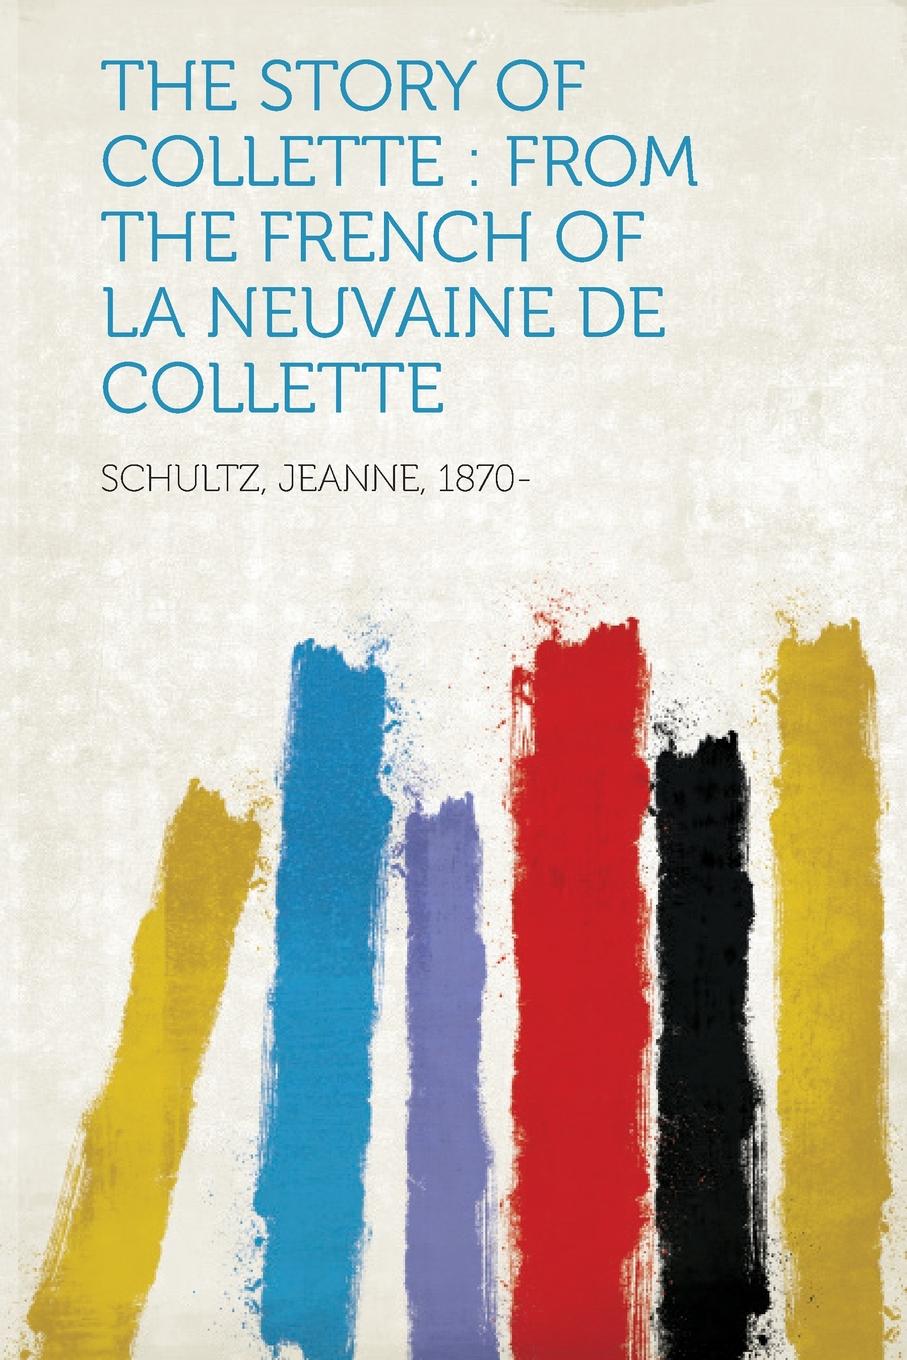 The Story of Collette. From the French of La Neuvaine de Collette